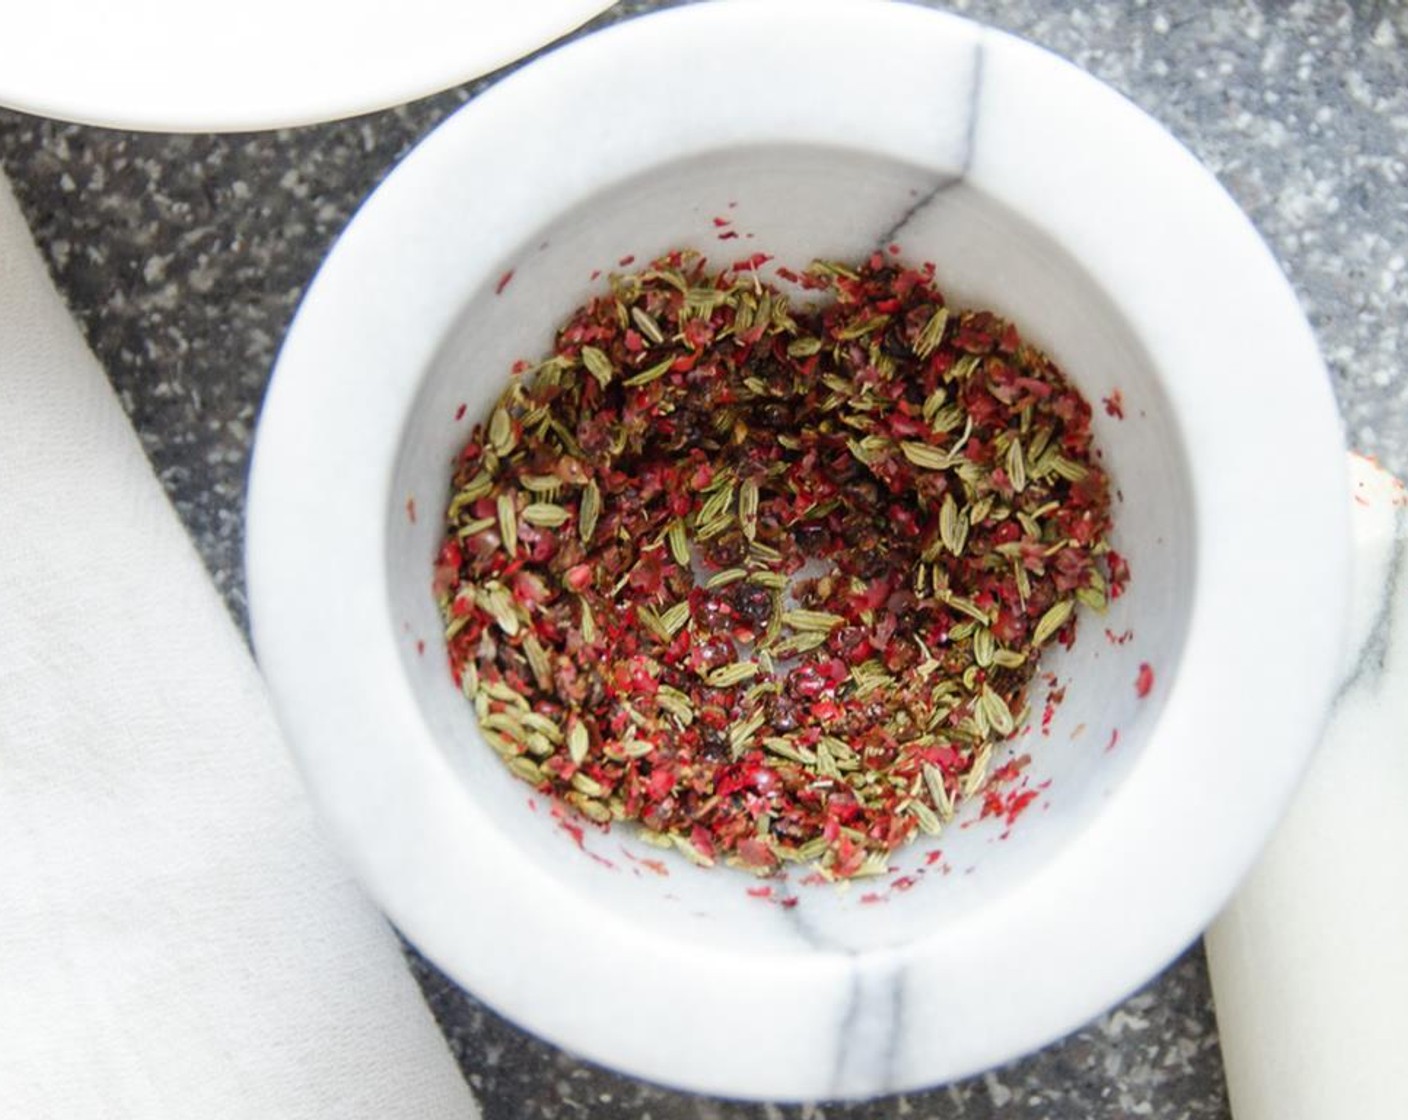 step 1 With a mortar and pestle or in a clean coffee grinder, crush the Pink Peppercorns (1 Tbsp) and Fennel Seeds (1 tsp). Transfer to a small bowl.